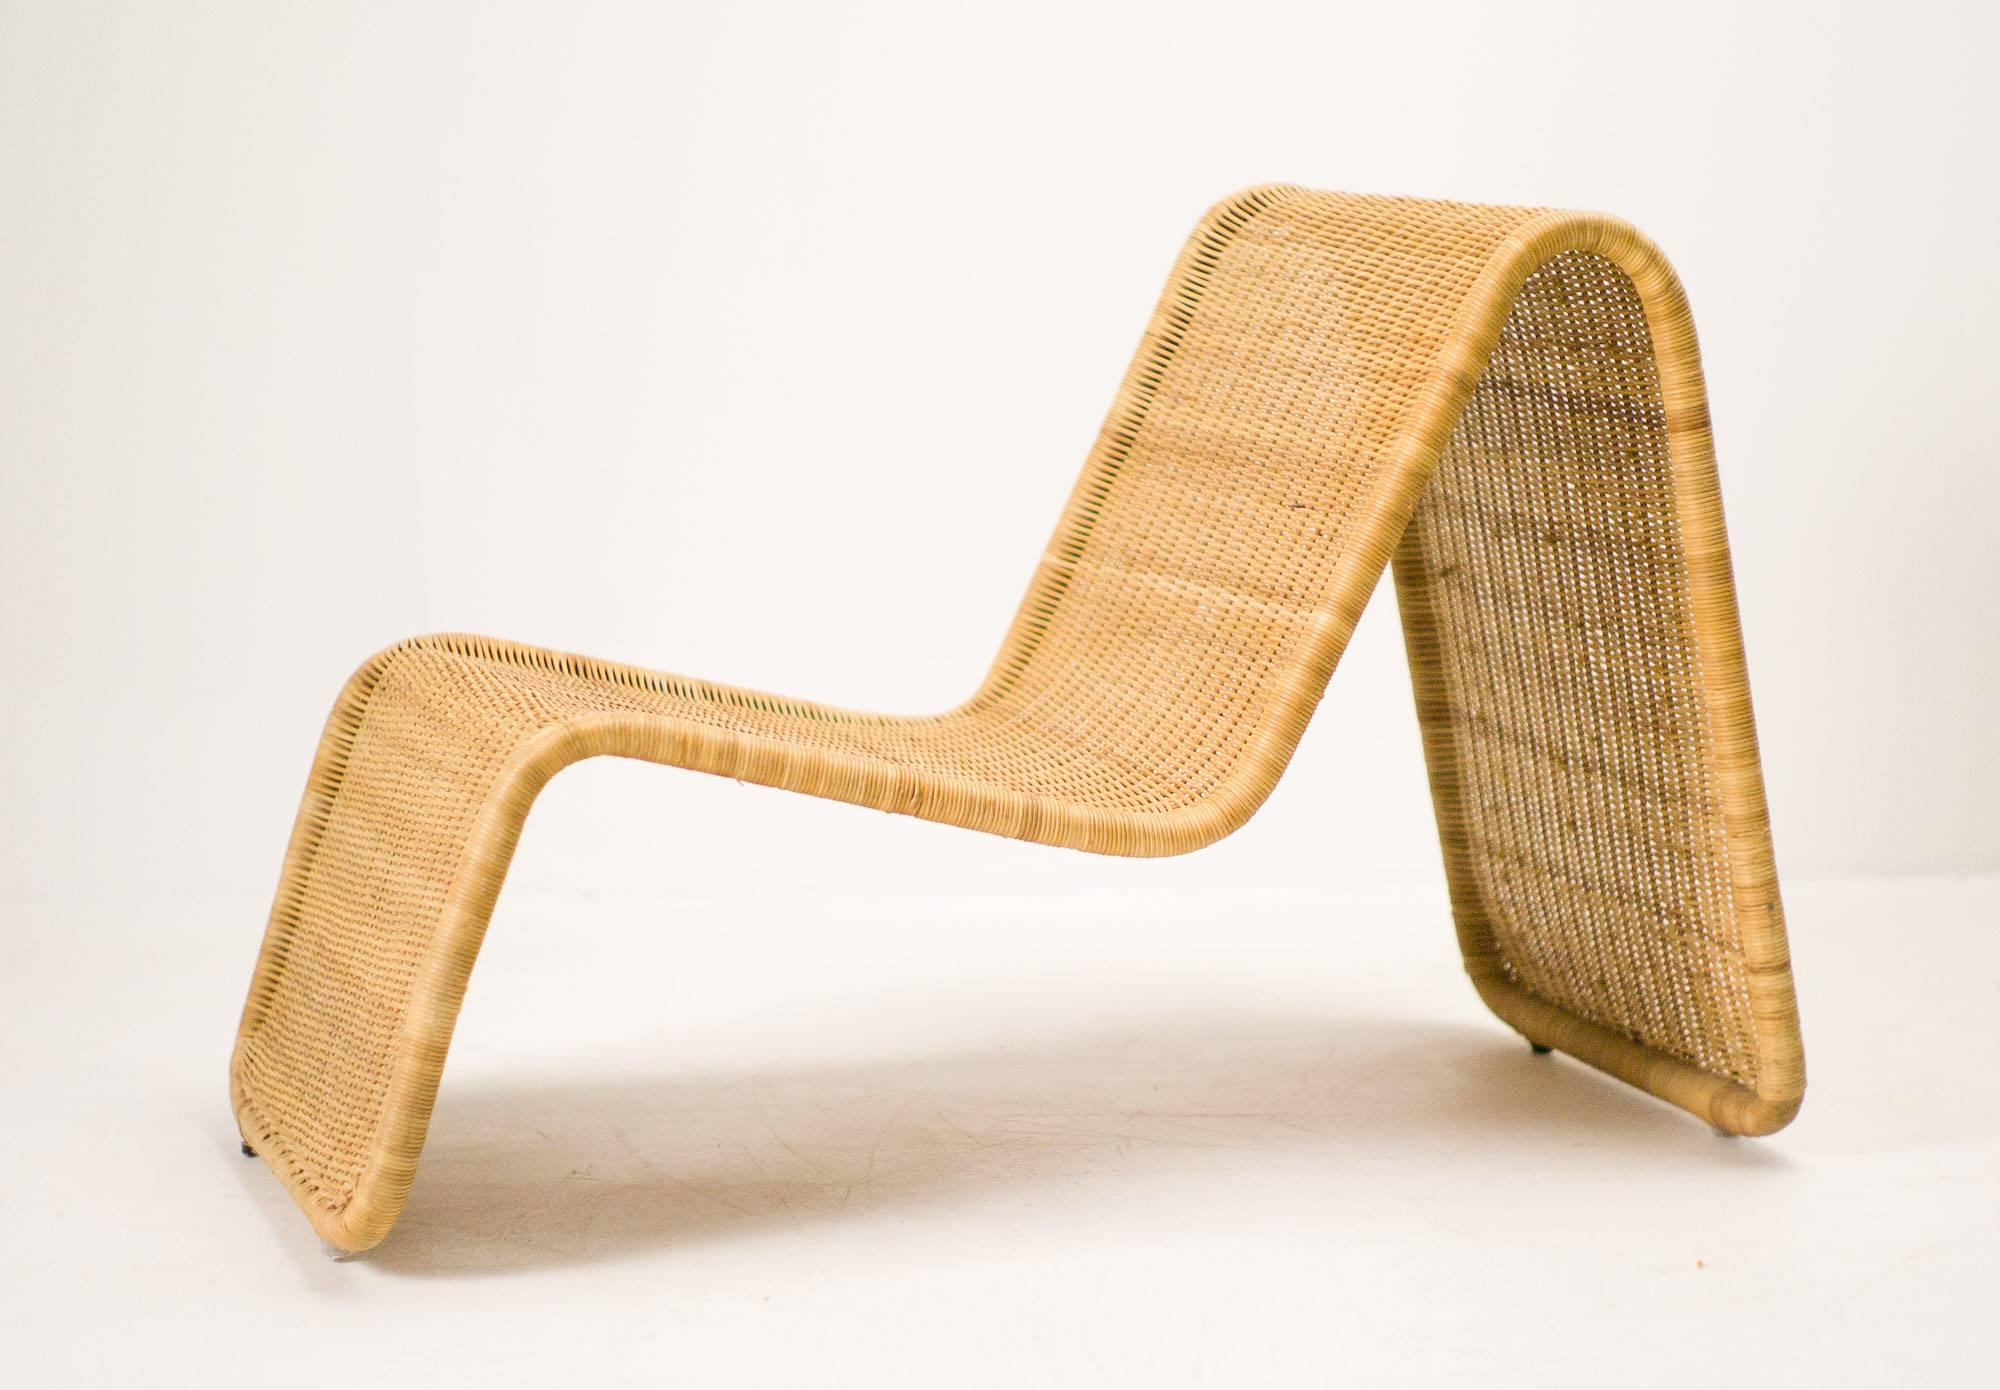 Sculptural chair in wicker by Tito Agnoli for Bonacina. Model P3.
Tubular steel frame, woven wicker seat.
Complementary shipping within Europe, excellent value on shipping anywhere else.
     